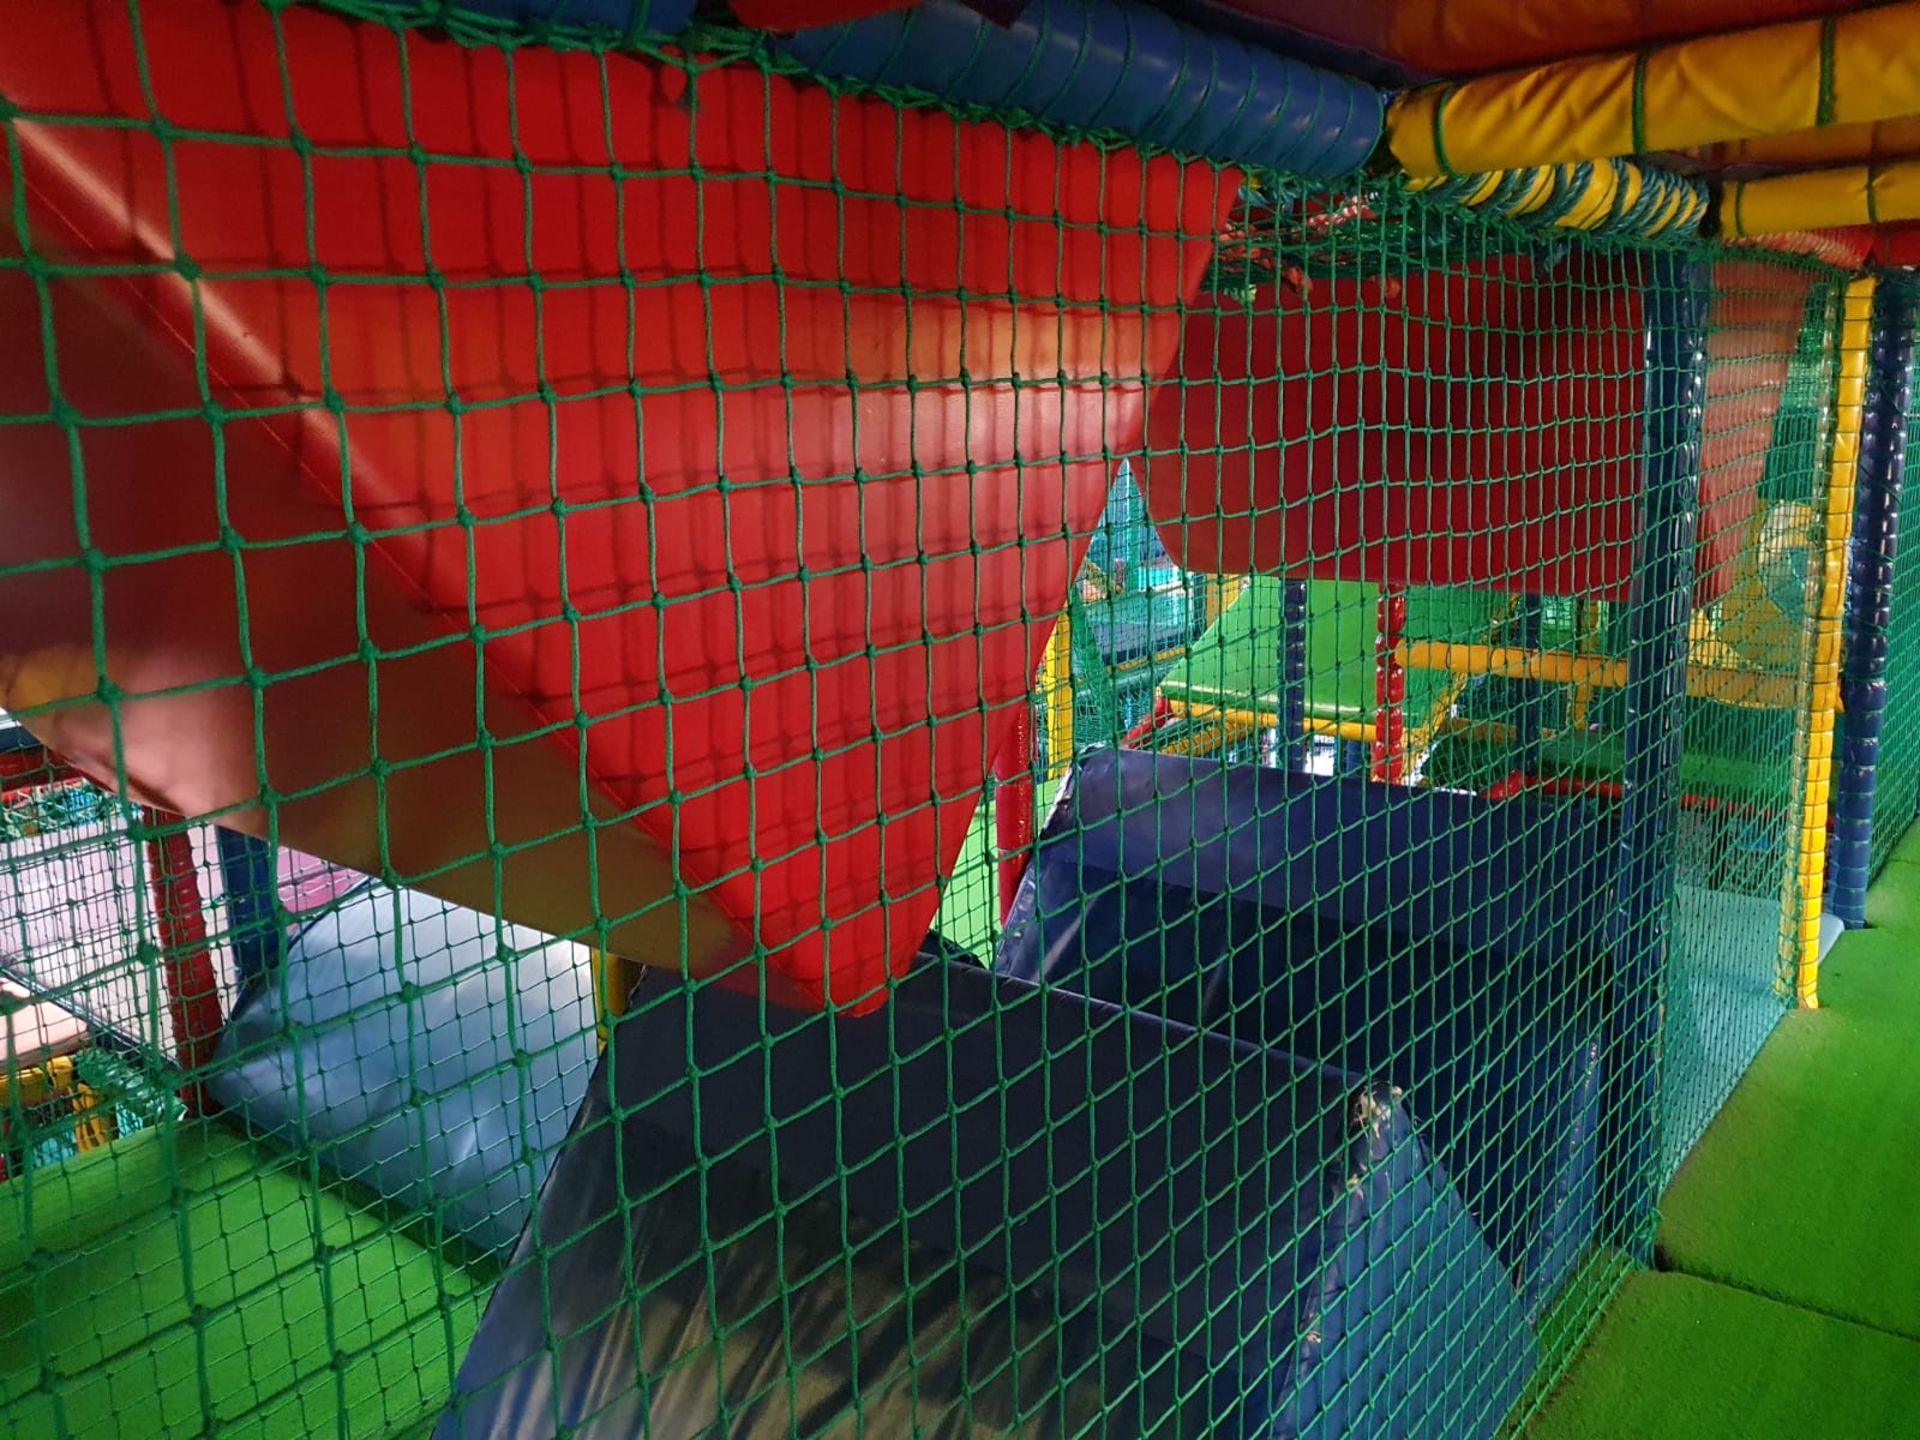 Bramleys Big Adventure Playground - Giant Action-Packed Playcentre With Slides, Zip Line Swings, - Image 38 of 99